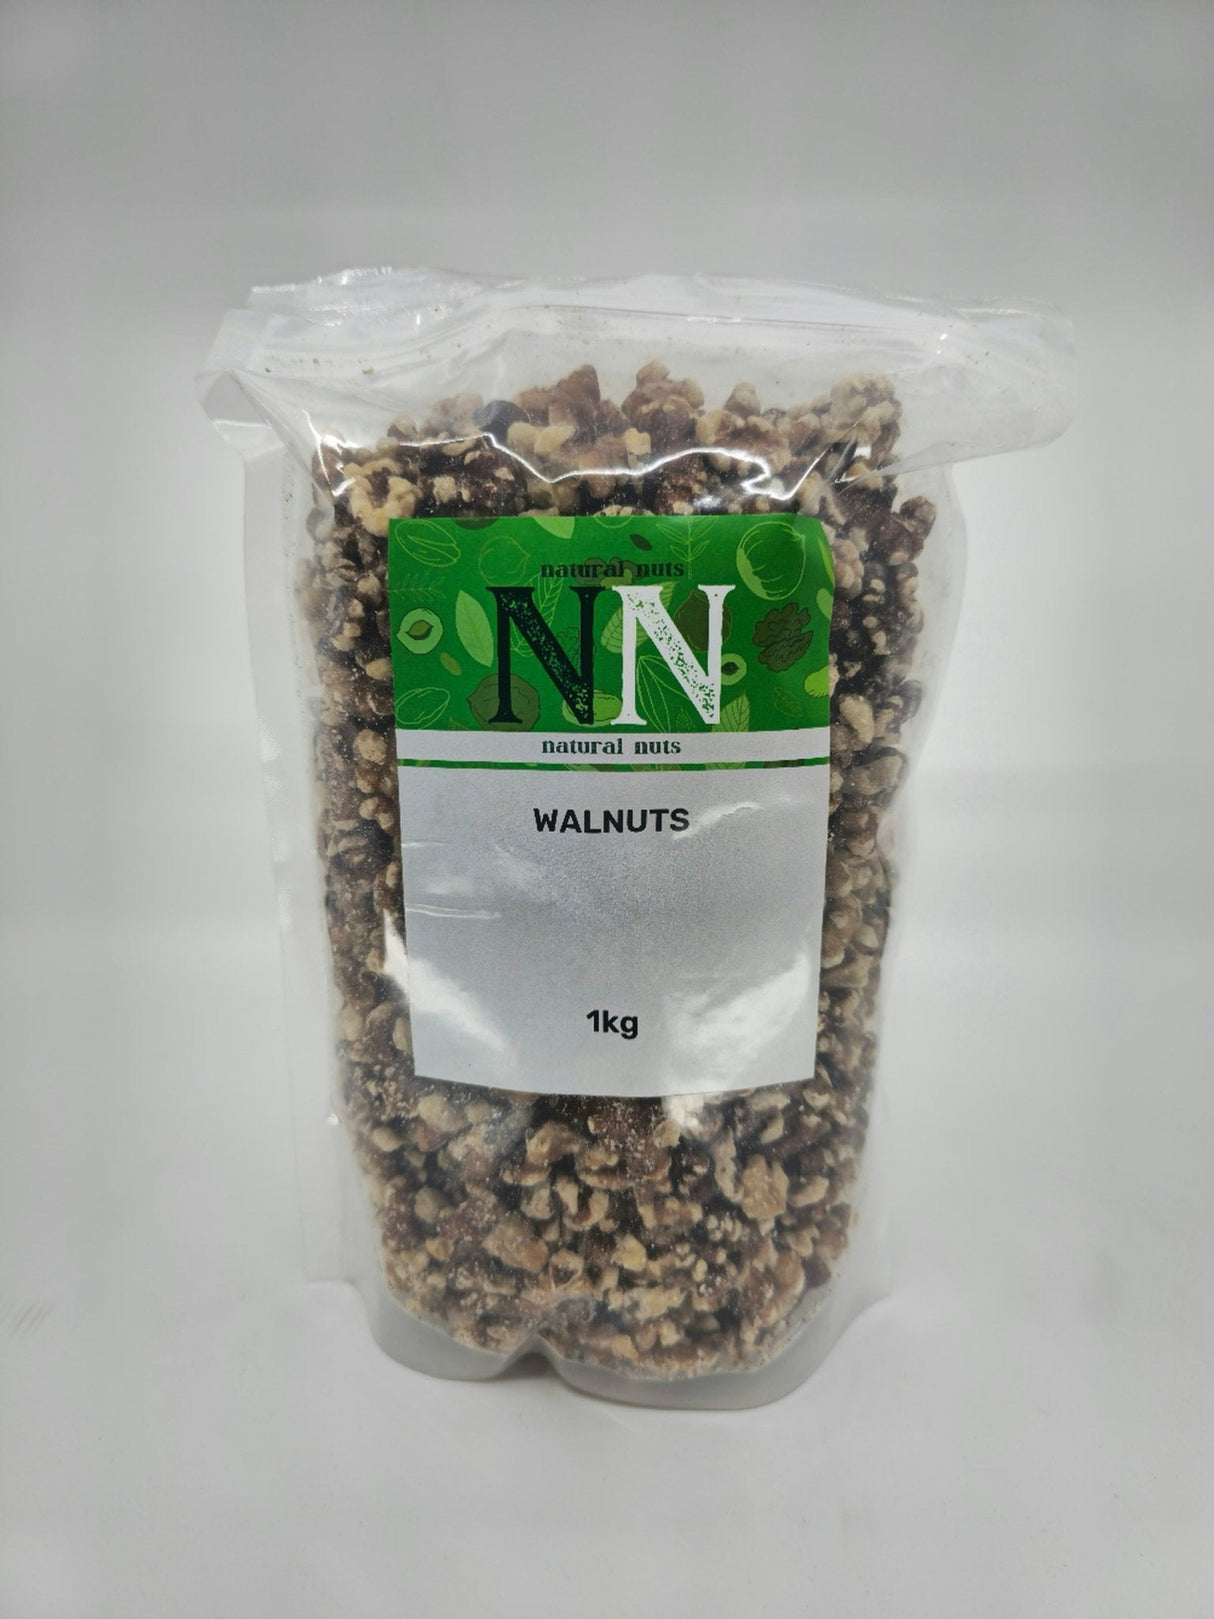 Natural Nuts Walnuts 1kg - Dr Earth - Dried Fruits Nuts & Seeds